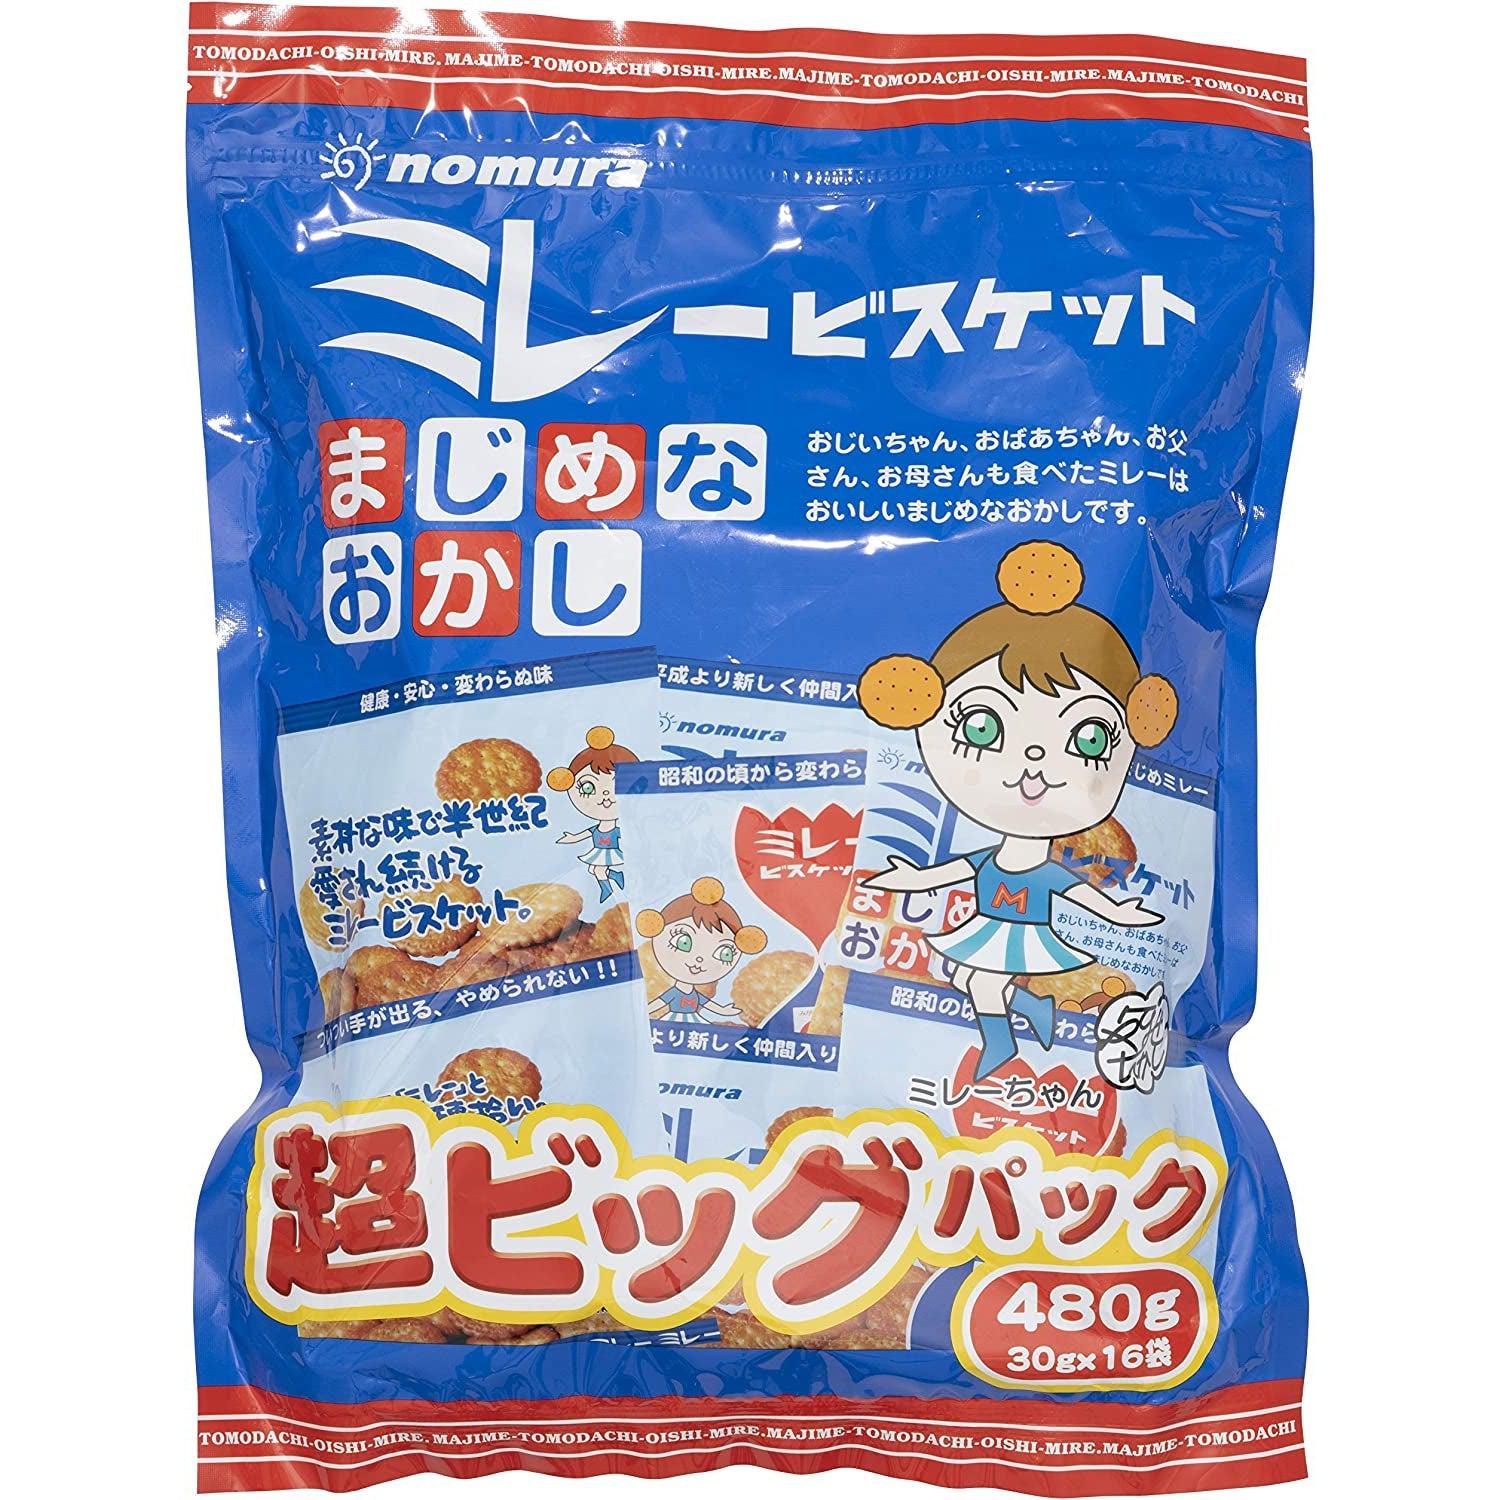 Nomura Mire Japanese Old Fashioned Biscuits 480g